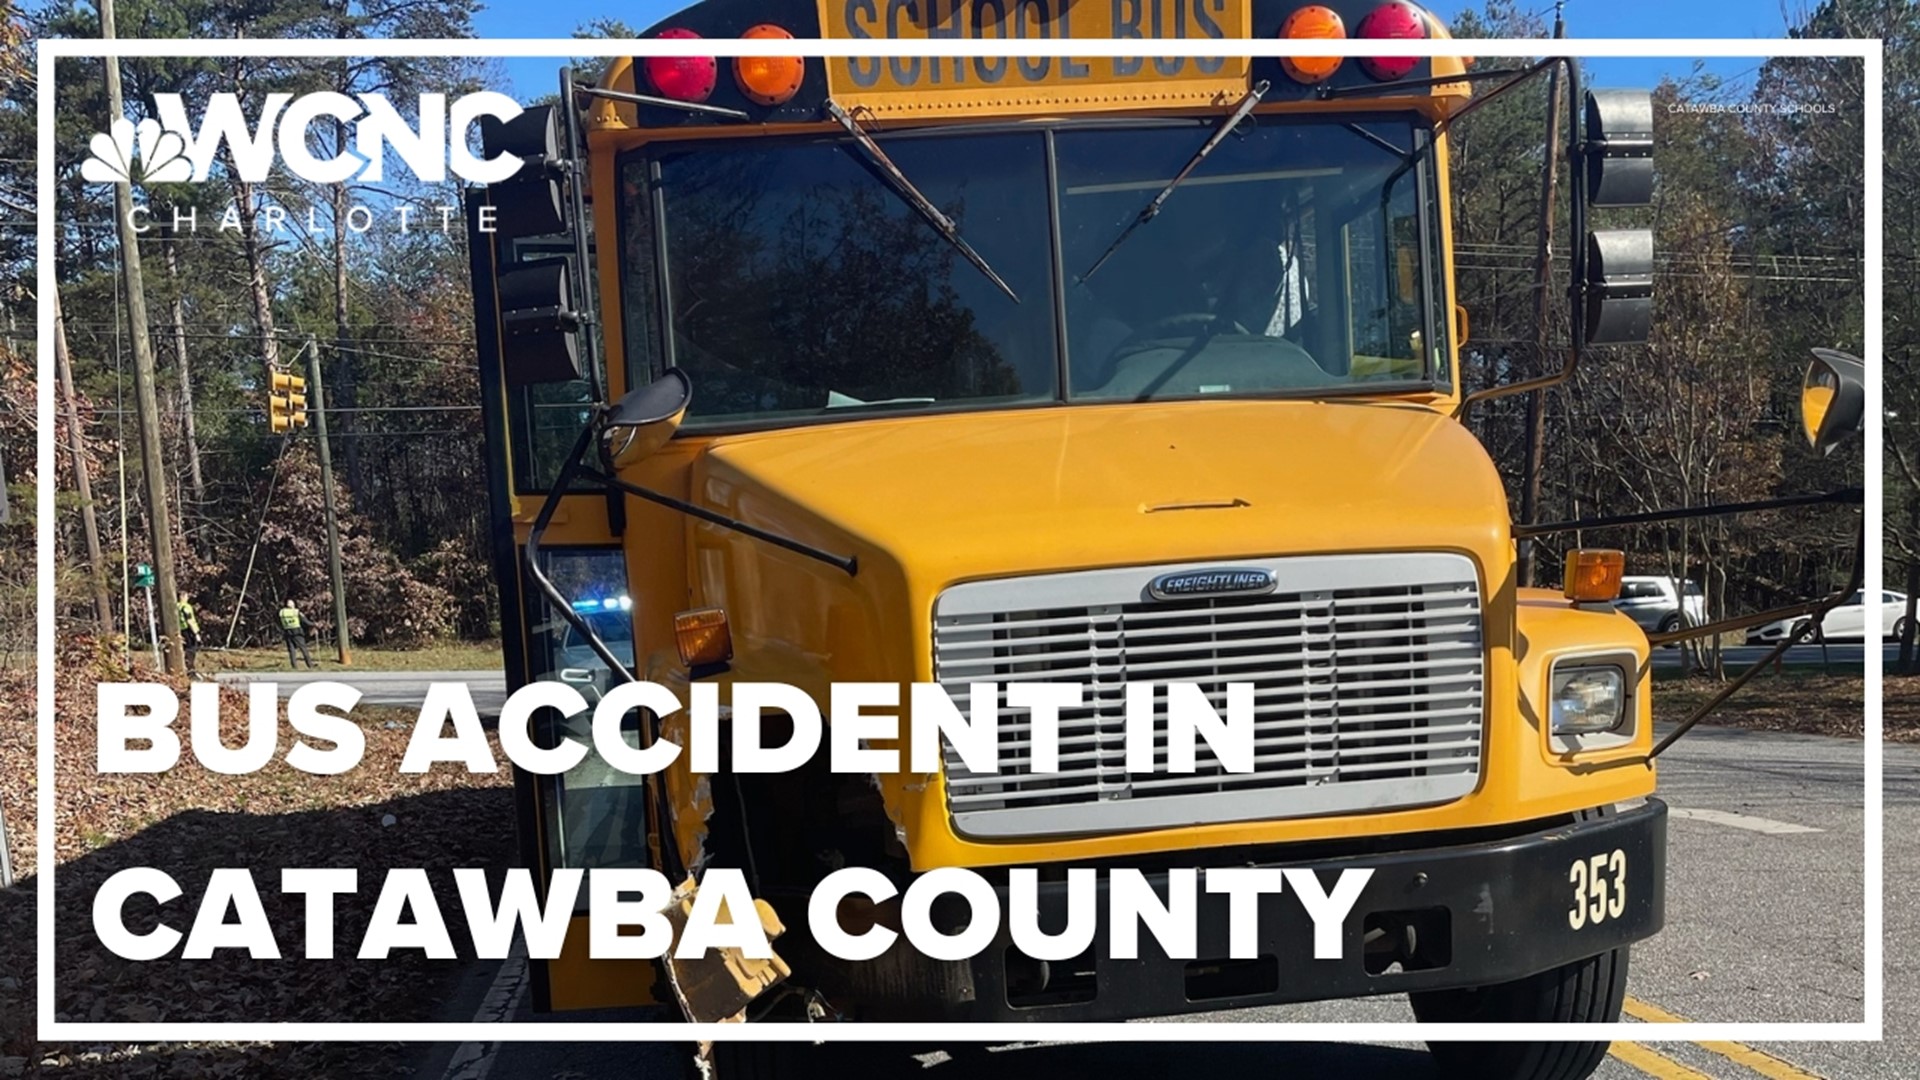 More than 60 kids and 4 teachers from Mountain View Elementary in Catawba County were on board a bus when it crashed into another car. All passengers are okay.